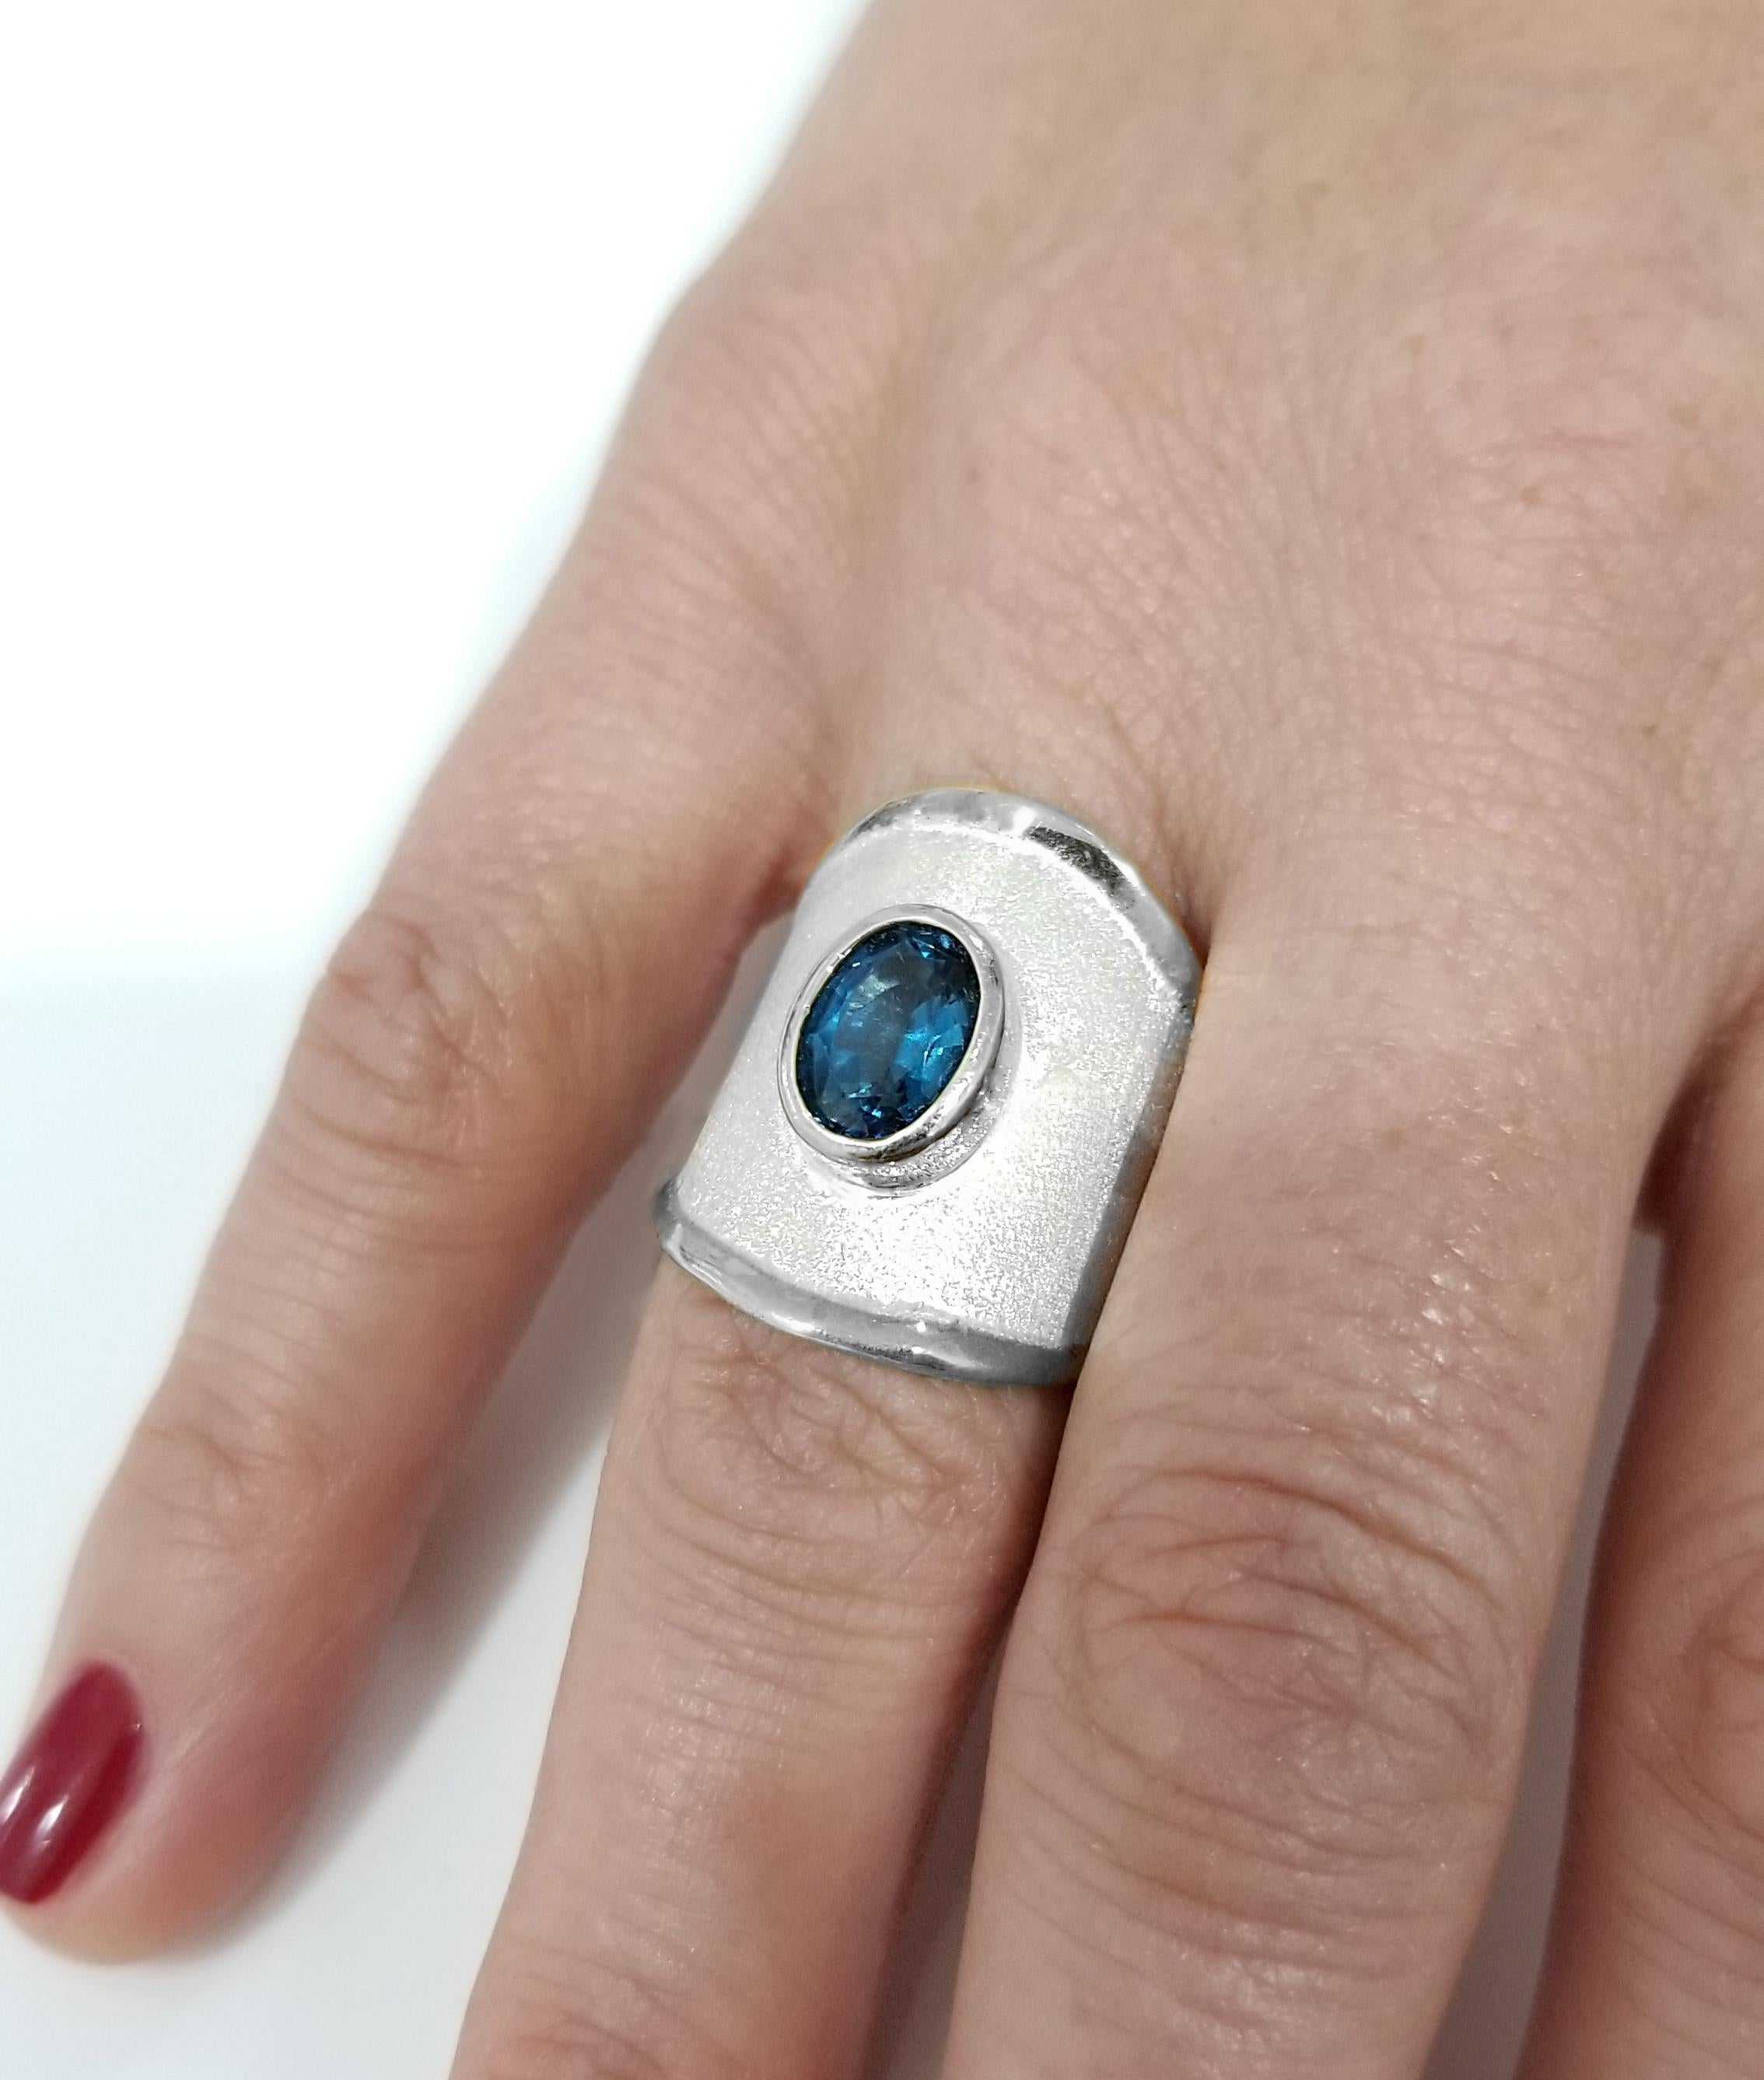 Yianni Creations 1.60 Carat Blue Topaz Ring in Fine Silver and 24 Karat Gold im Zustand „Neu“ in Astoria, NY